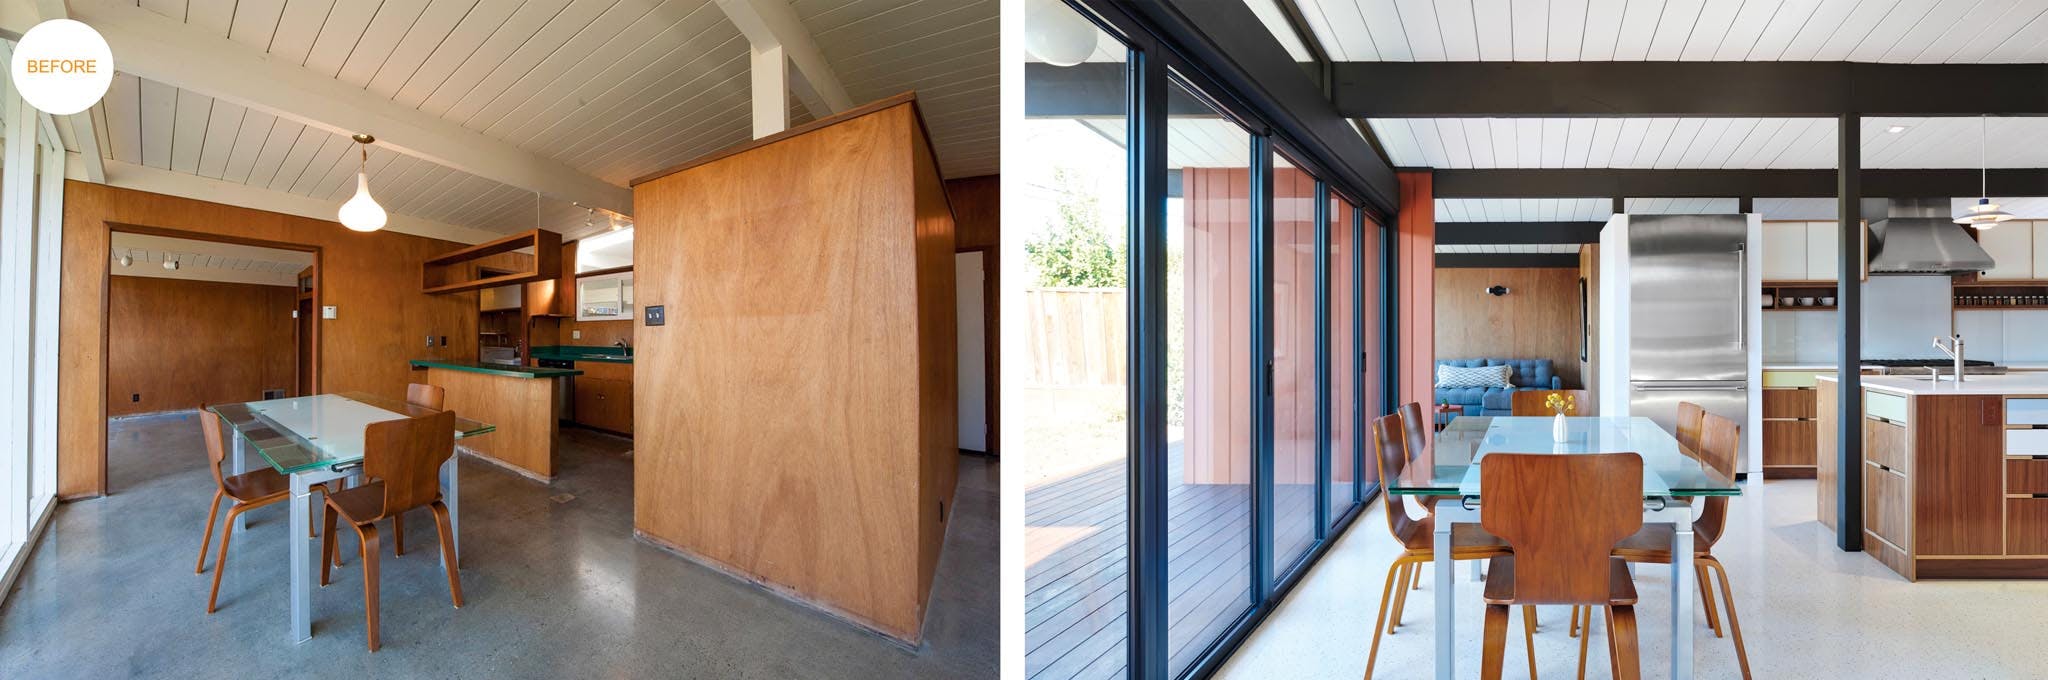 opening the dining room of eichler home to the backyard with NanaWall folding door